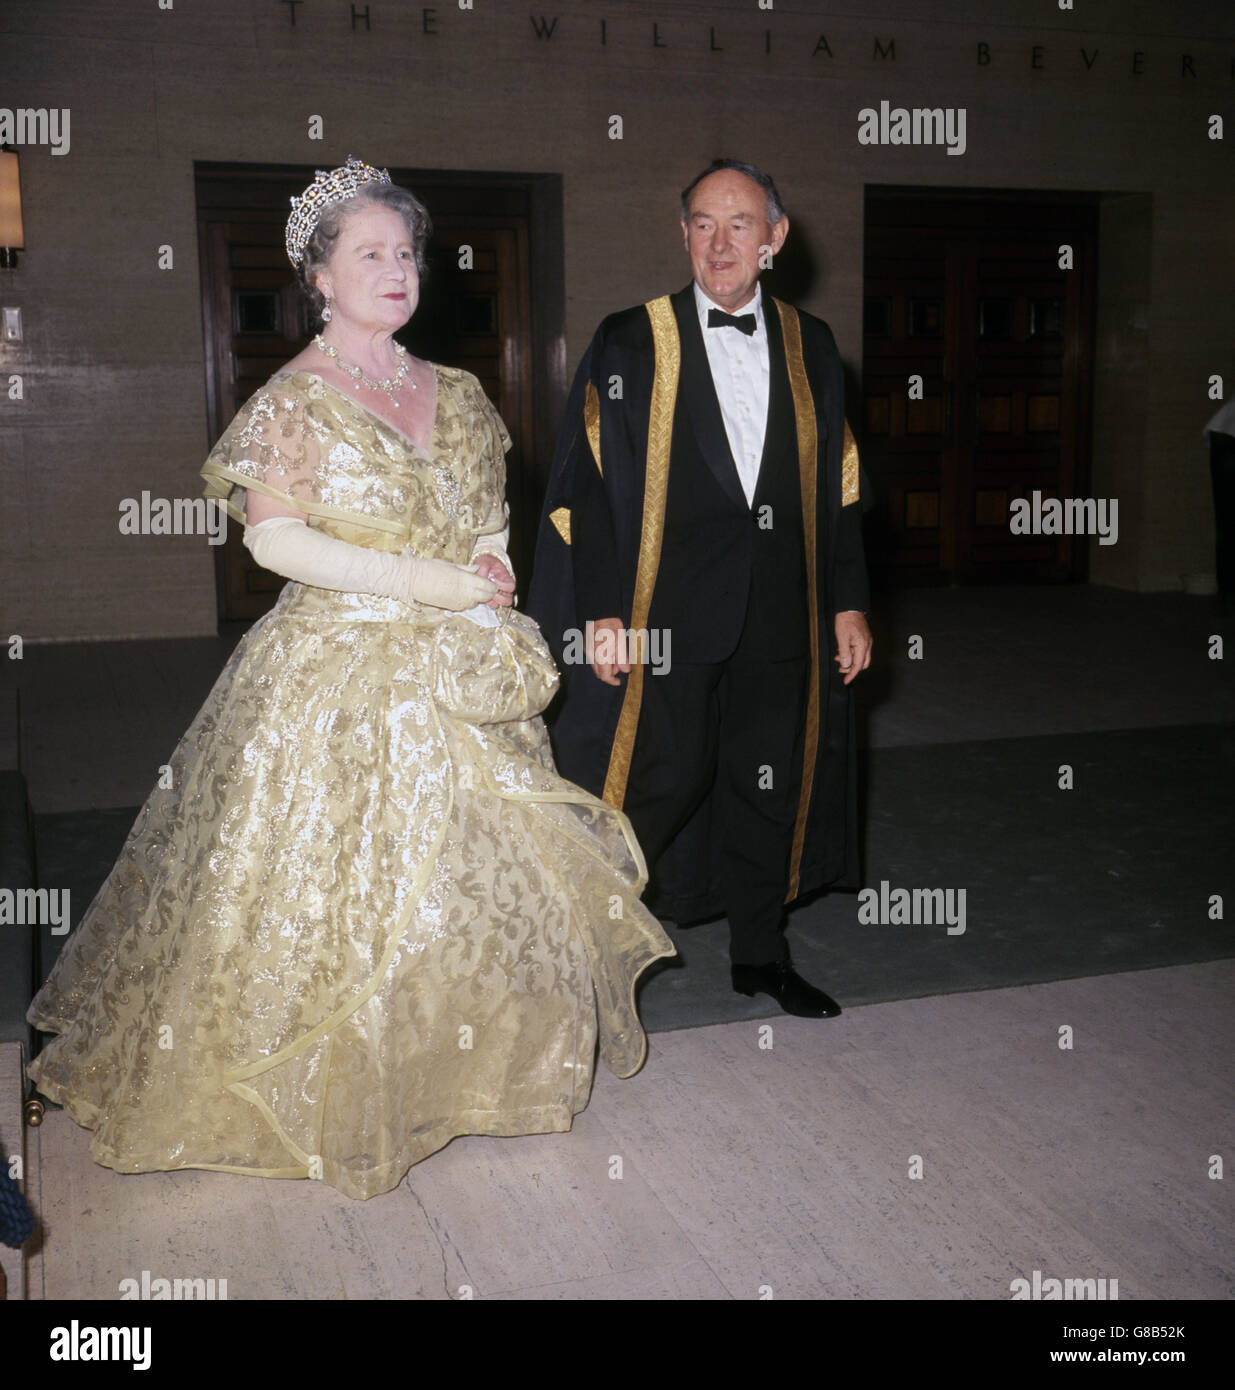 Queen Elizabeth, the Queen Mother, Chancellor of the University of London, at the University's State House, Marlet Street, London, attending celebrations in honour of Foundation Day. Her escort is the Vice-Chancellor, Professor Sir Owen Saunders. Stock Photo